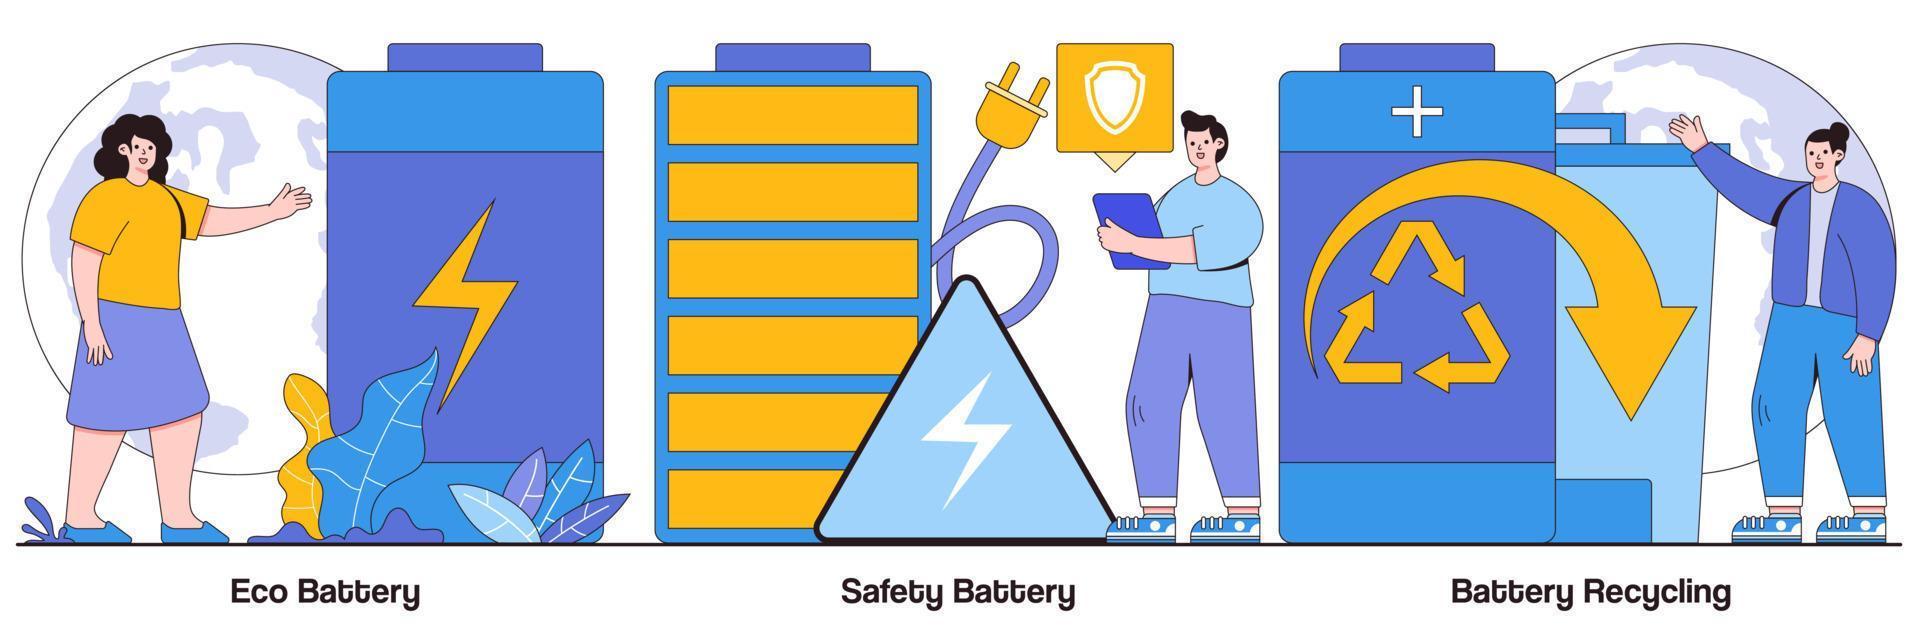 Eco Battery, Safety Battery, and Battery Recycling Illustrated Pack vector